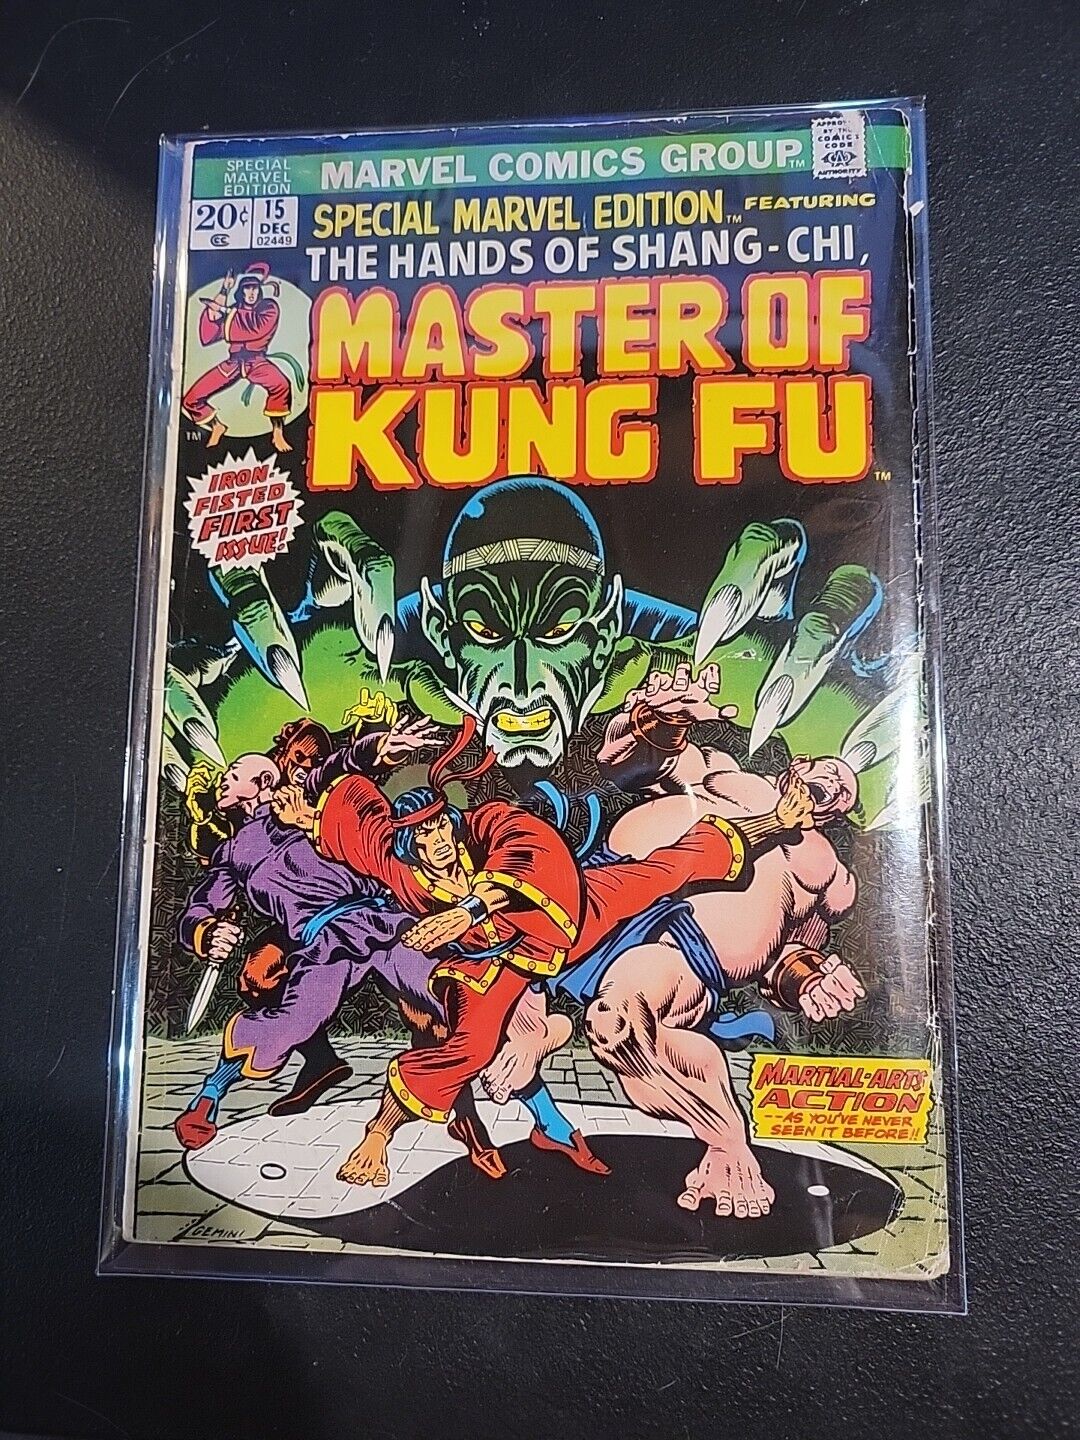 1973 MASTER OF KUNG FU Comic Special Marvel Edition #15 Lower Grade